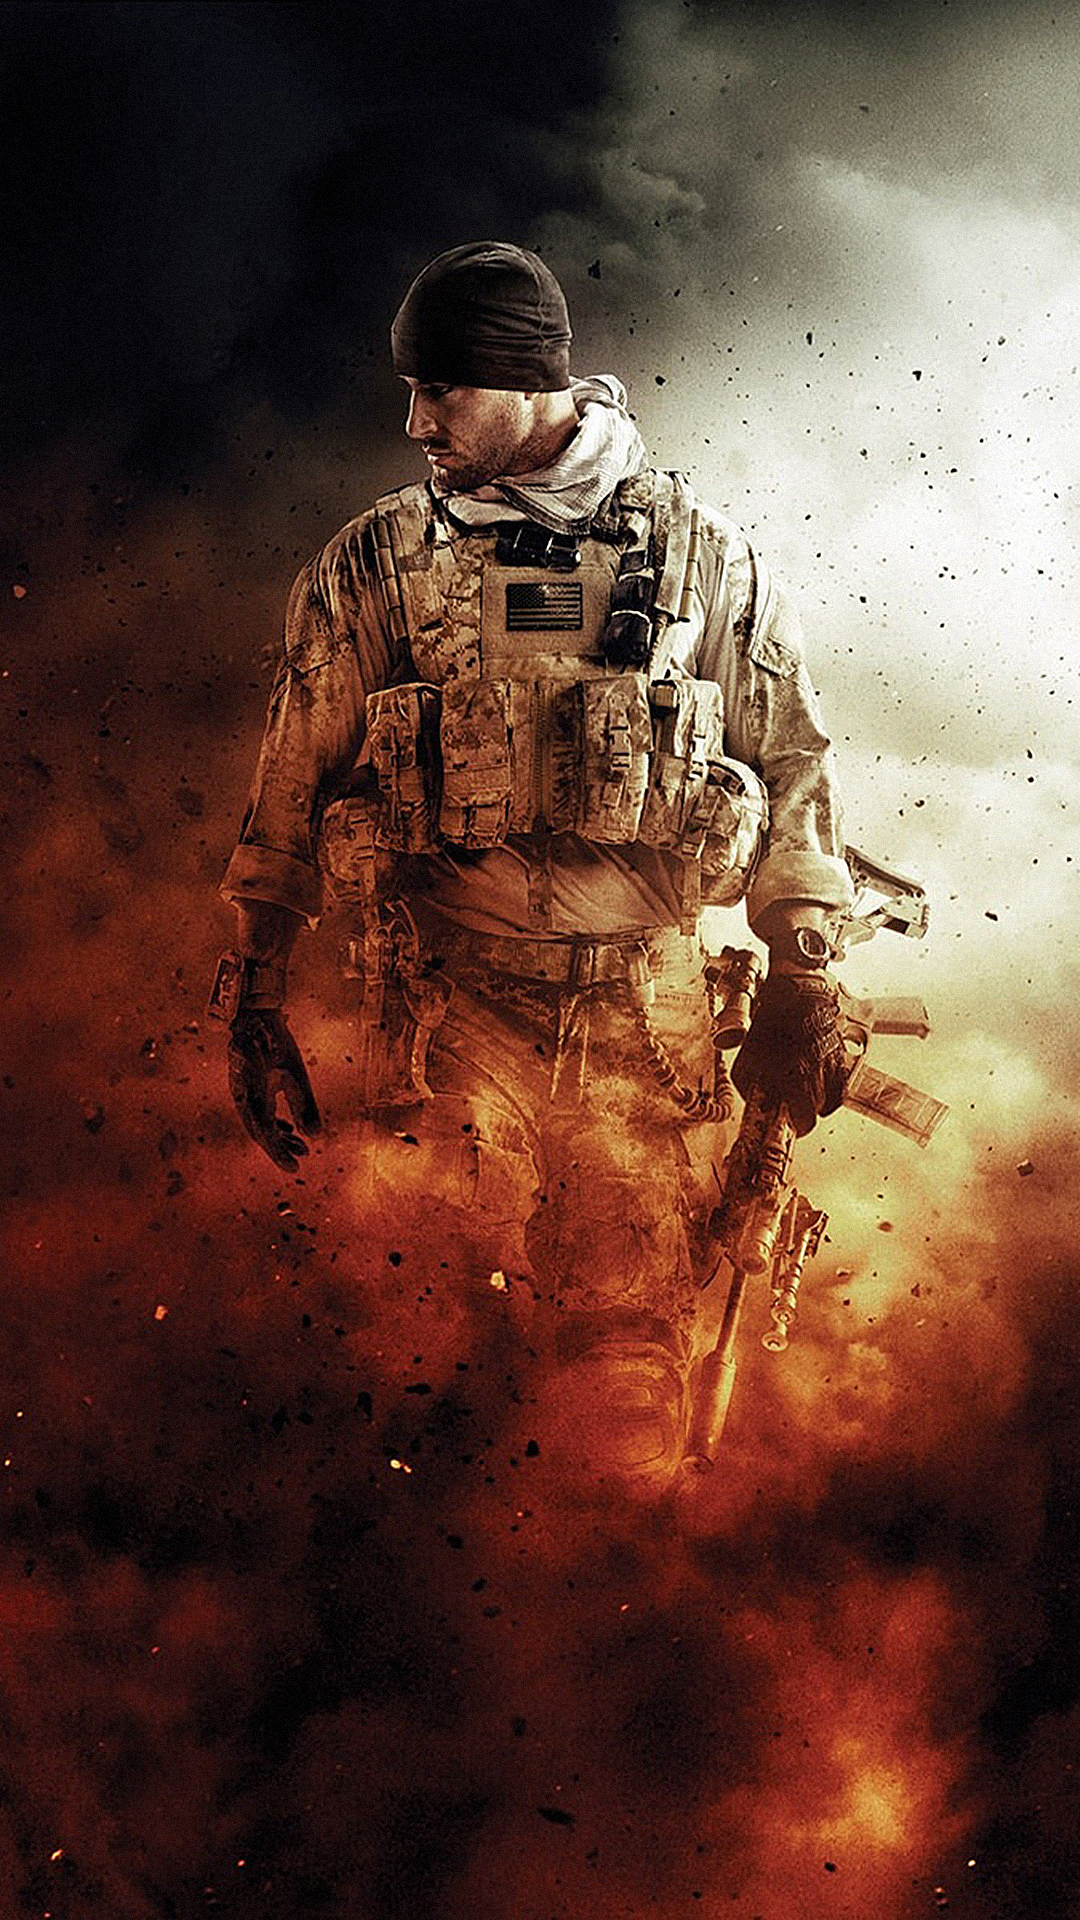 medal of honor, video game, medal of honor: warfighter